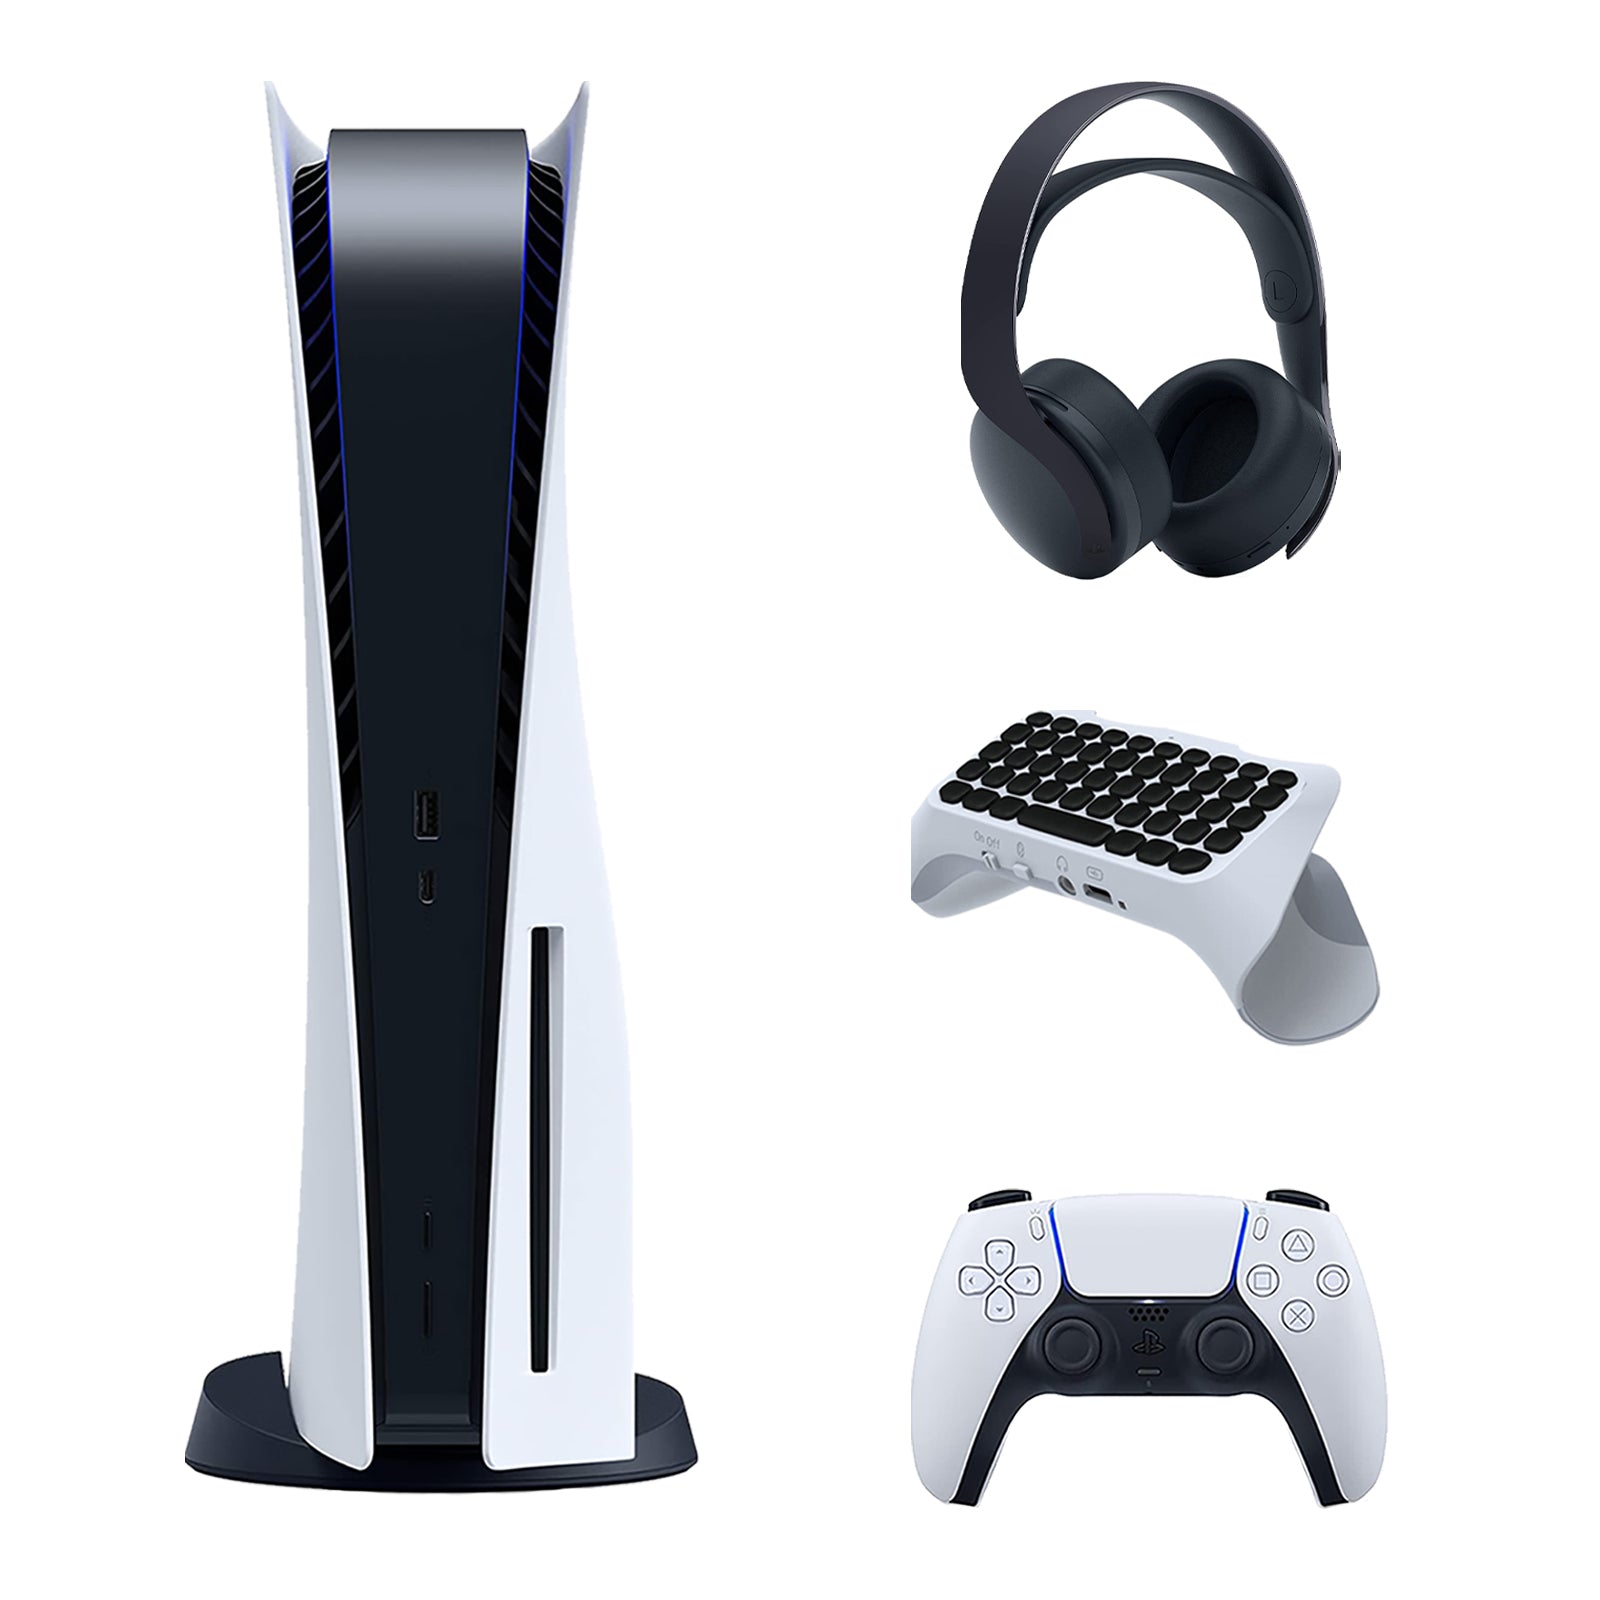 Sony Playstation 5 Disc Version Console with Black PULSE 3D Wireless Gaming Headset and Surge QuickType 2.0 Wireless PS5 Controller Keypad - Pro-Distributing